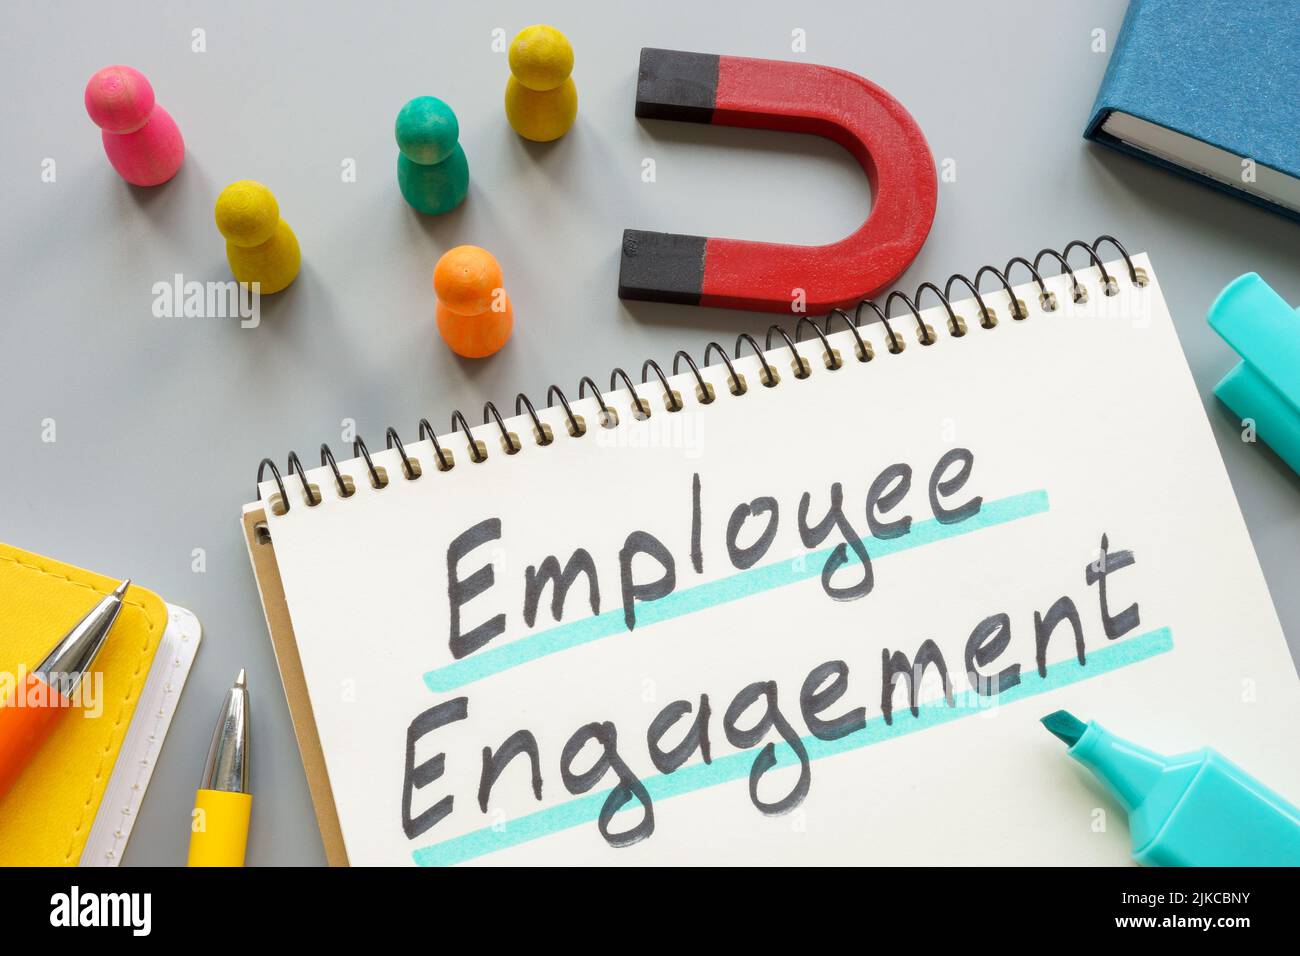 Phrase employee engagement near magnet and figurines. Stock Photo